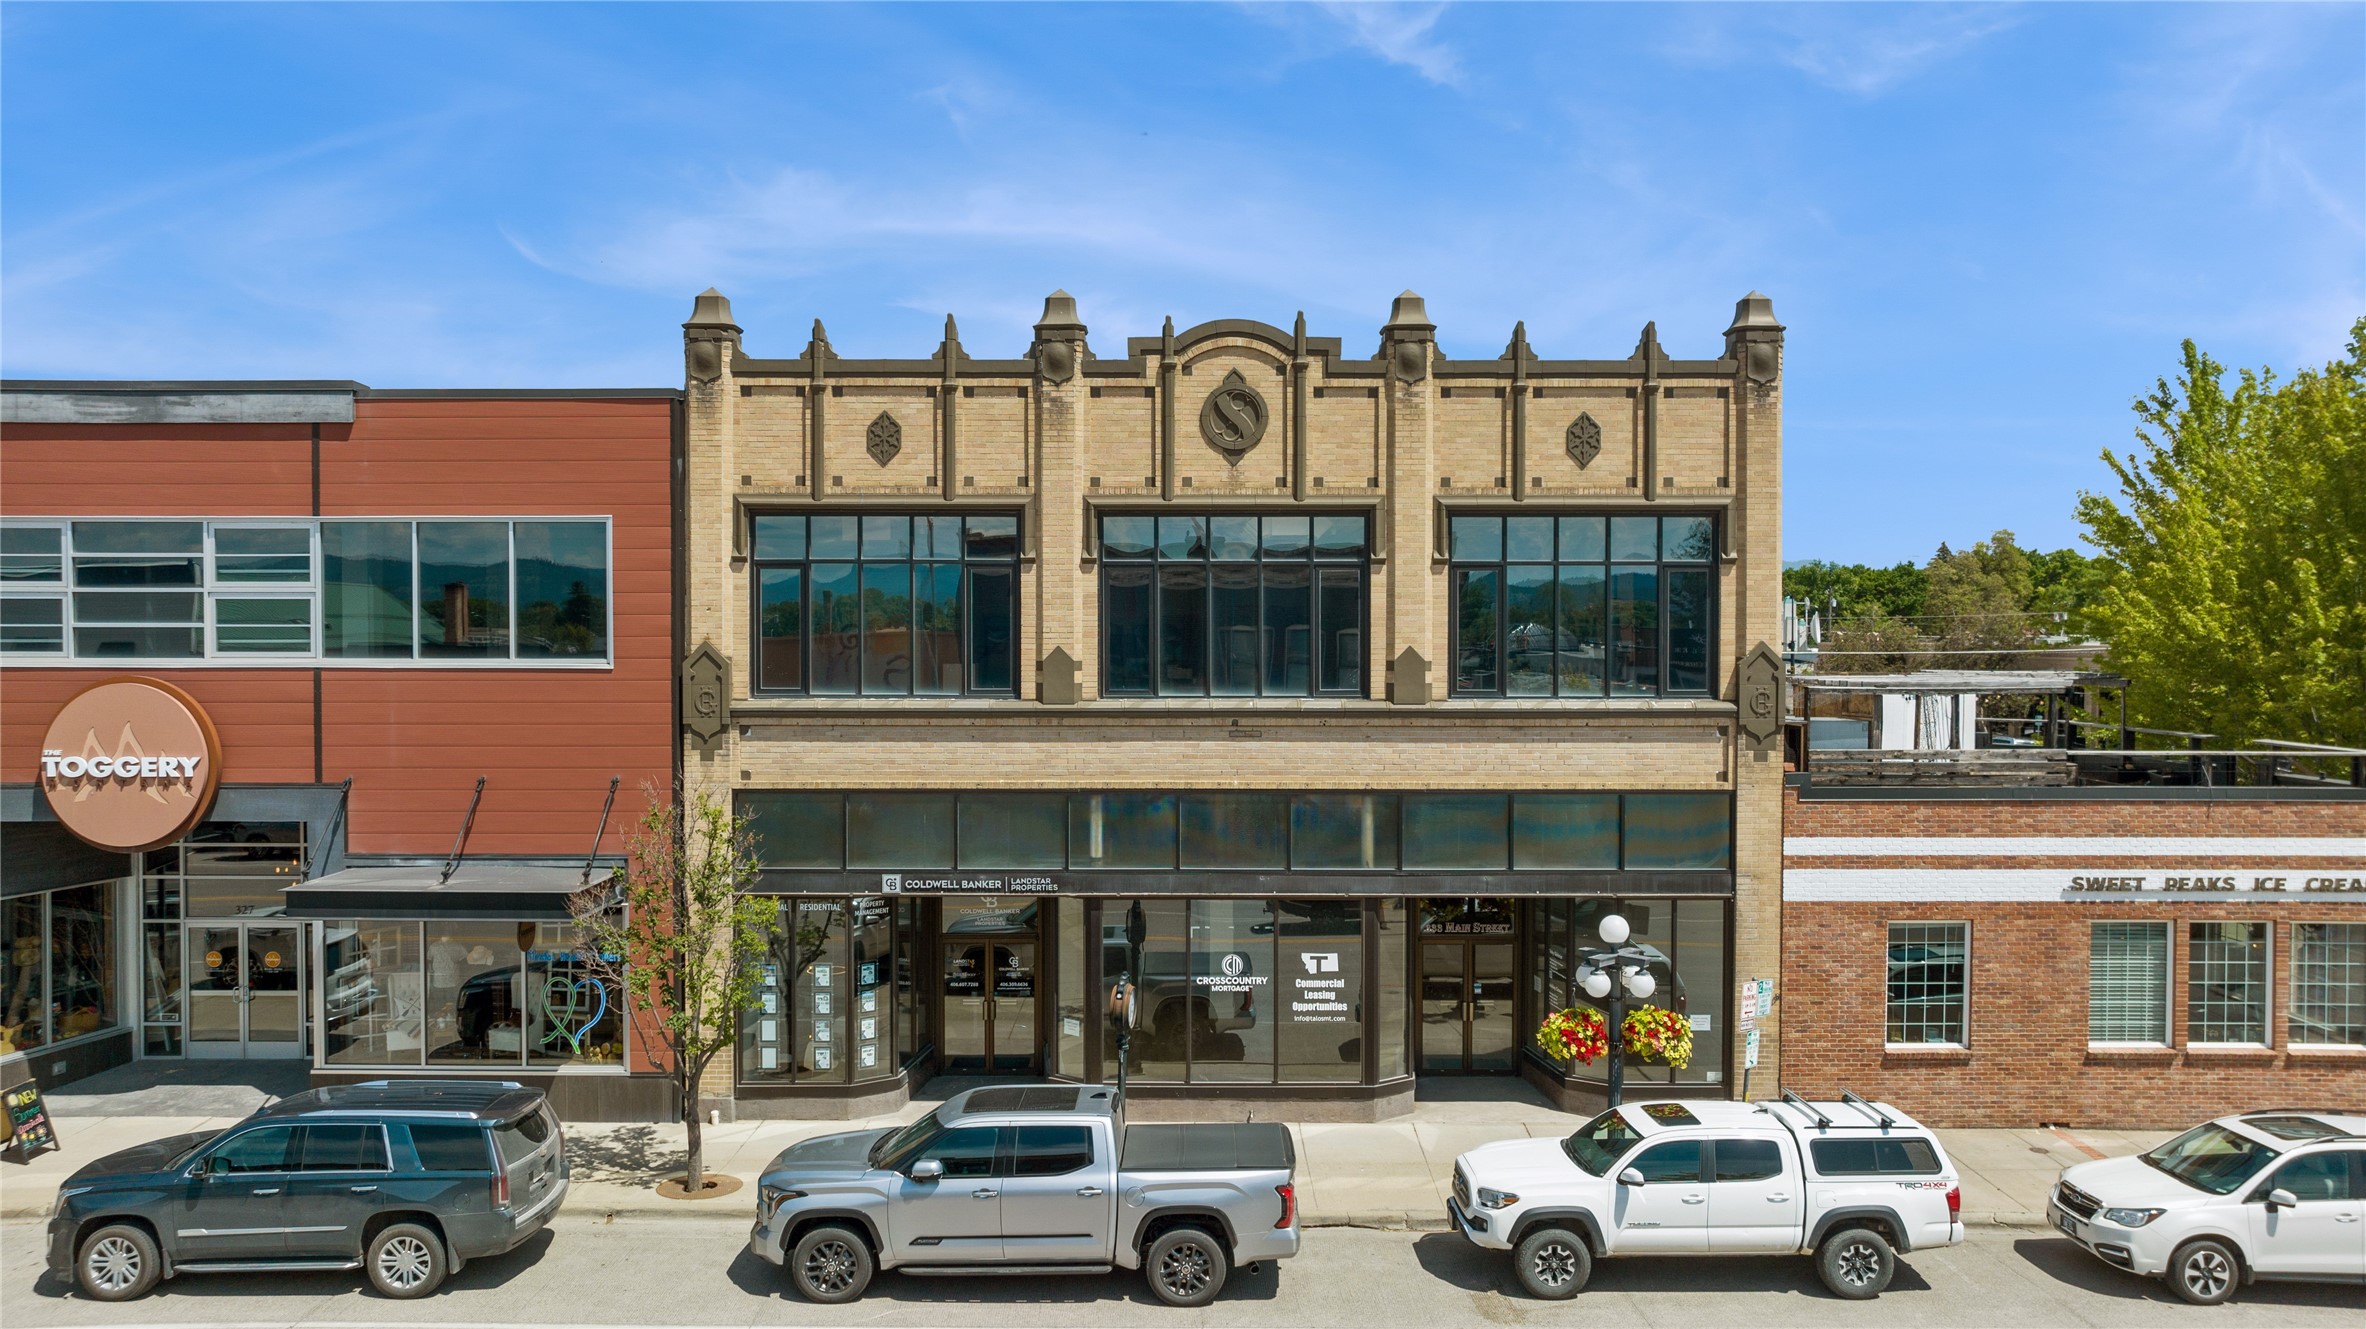 Rare opportunity! Investors, bring your vision and don't miss this iconic downtown Kalispell gem! Built in 1928, this former Montgomery Ward building showcases Gothic-inspired design with decorative brickwork and a stunning parapet. With a prime location between Sweet Peaks and The Toggery, high visibility, and traffic count of over 20,000, this mostly vacant retail/office space is bursting with potential. Expand your vision and consider the potential of creating residential units by building up/adding two additional floors. Act now to revitalize this historic treasure and create a thriving business. Endless possibilities await. Call Kristin Zuckerman (406) 291-0778 or your real estate professional today.